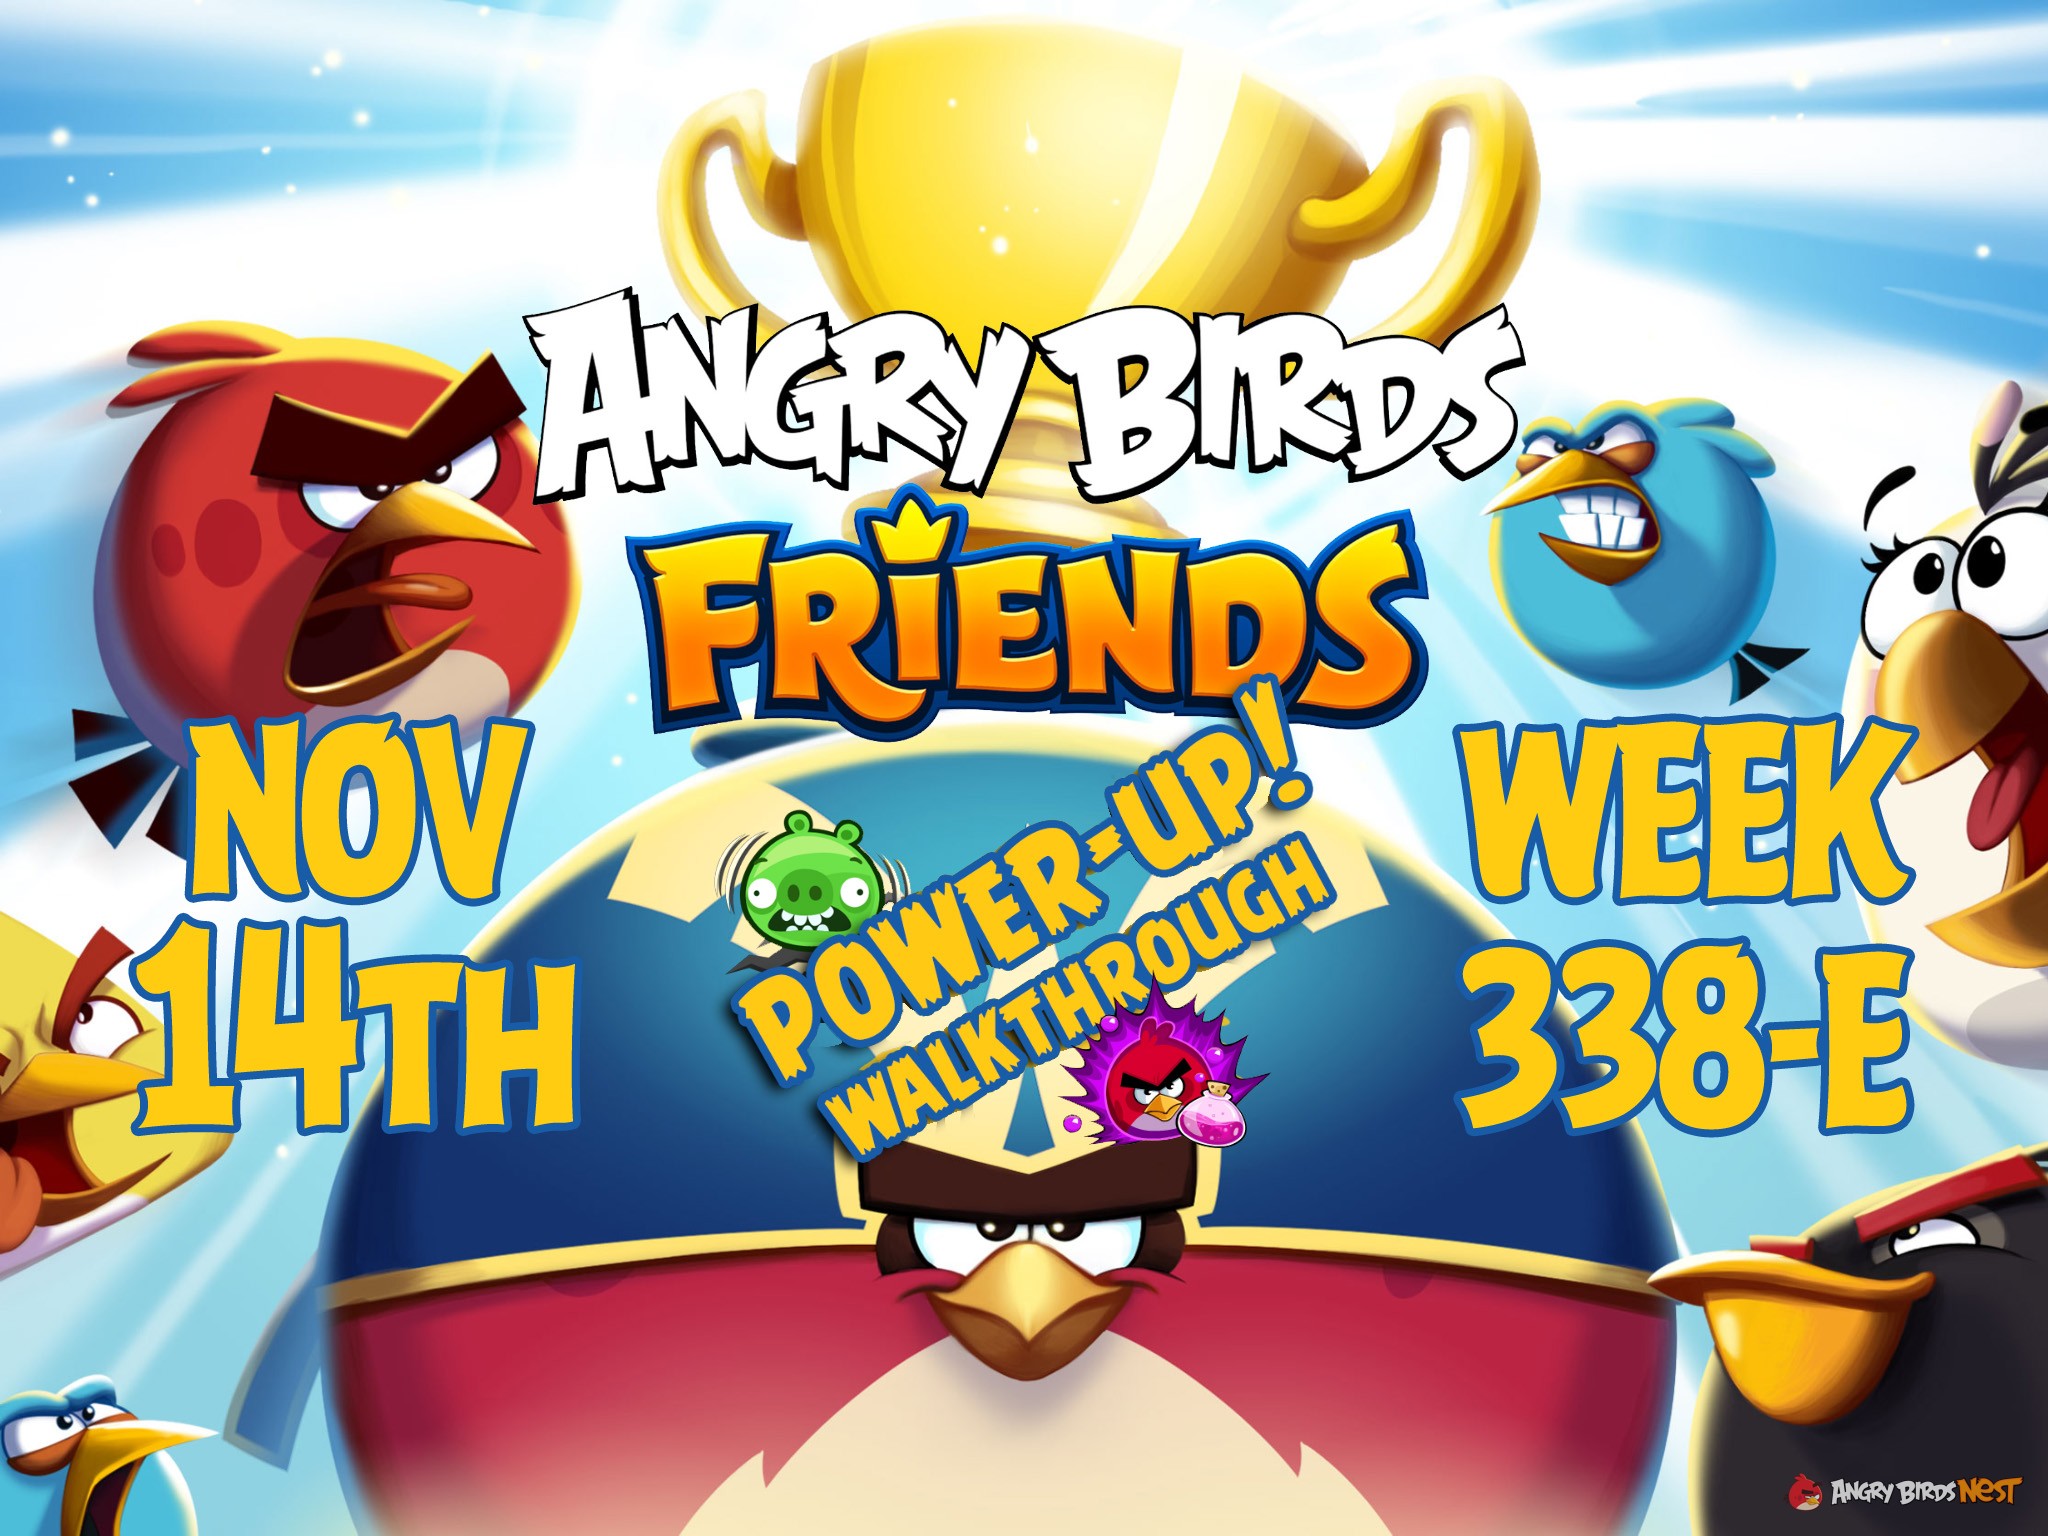 Angry-Birds-Friends-Tournament-Week-338-E-Feature-Image-PU